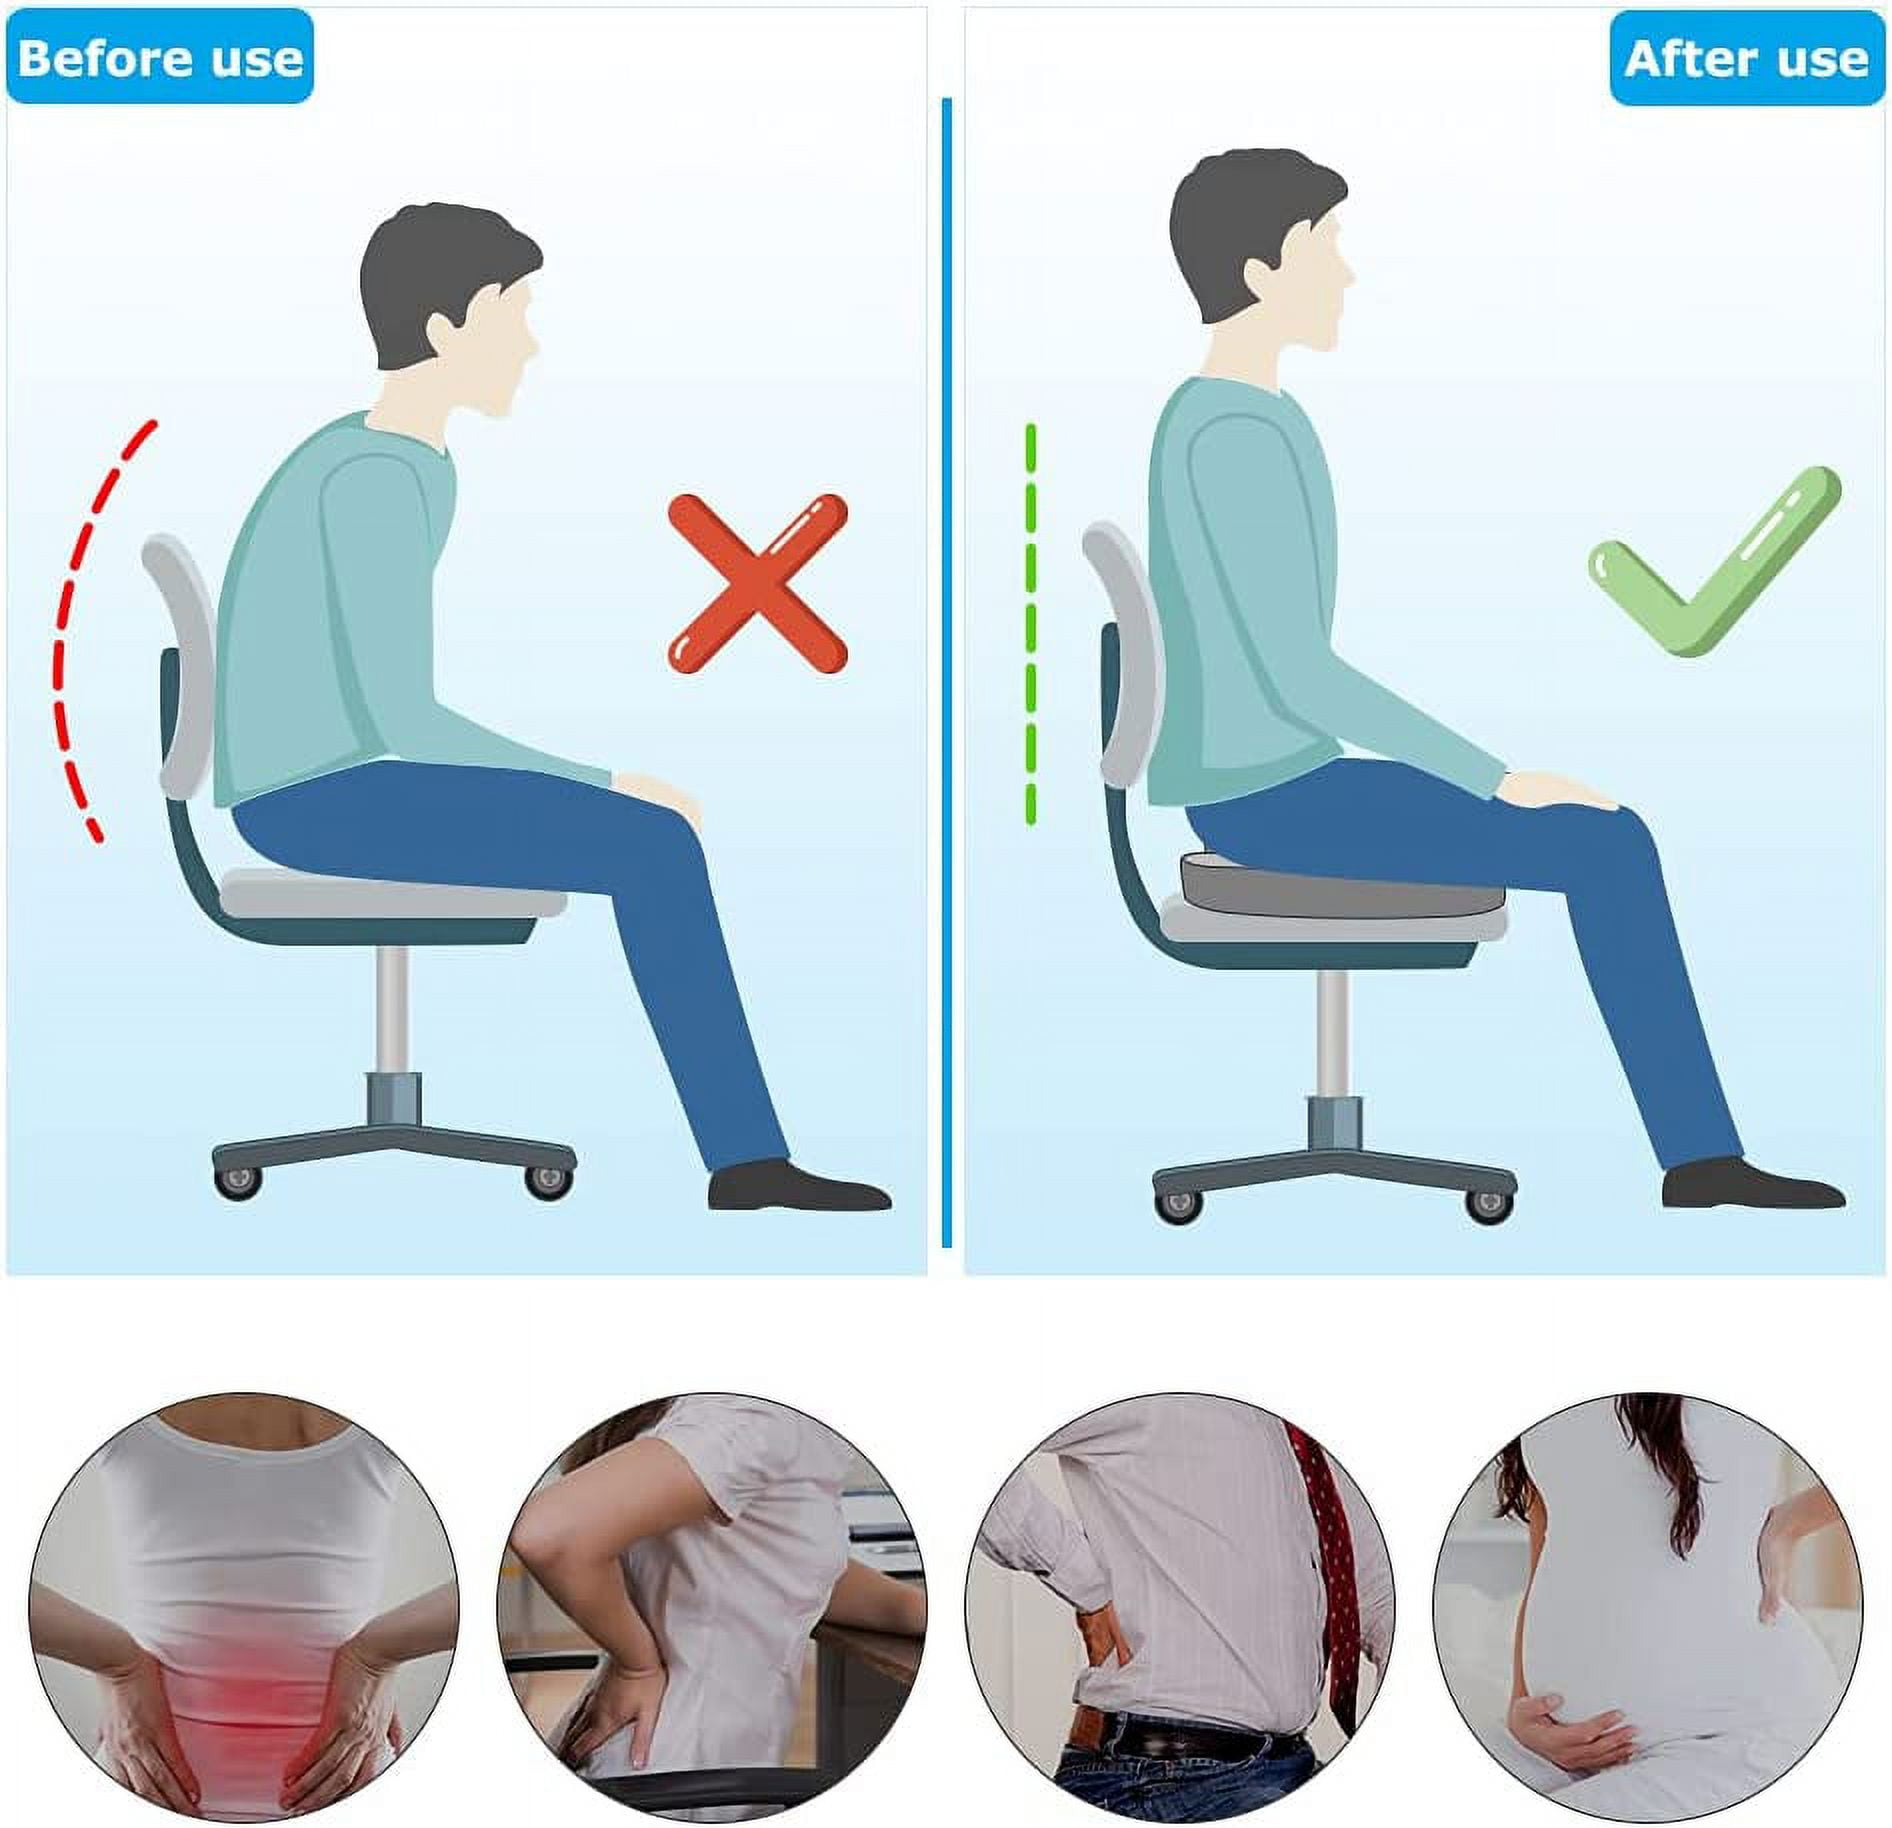  5 STARS UNITED Seat Cushion for Desk Chair - Tailbone, Coccyx  Sciatica Pain Relief - Office Chair Cushions - Wheelchair Cushions - Car Seat  Cushions - Pressure Relief Lifting Cushions : Office Products